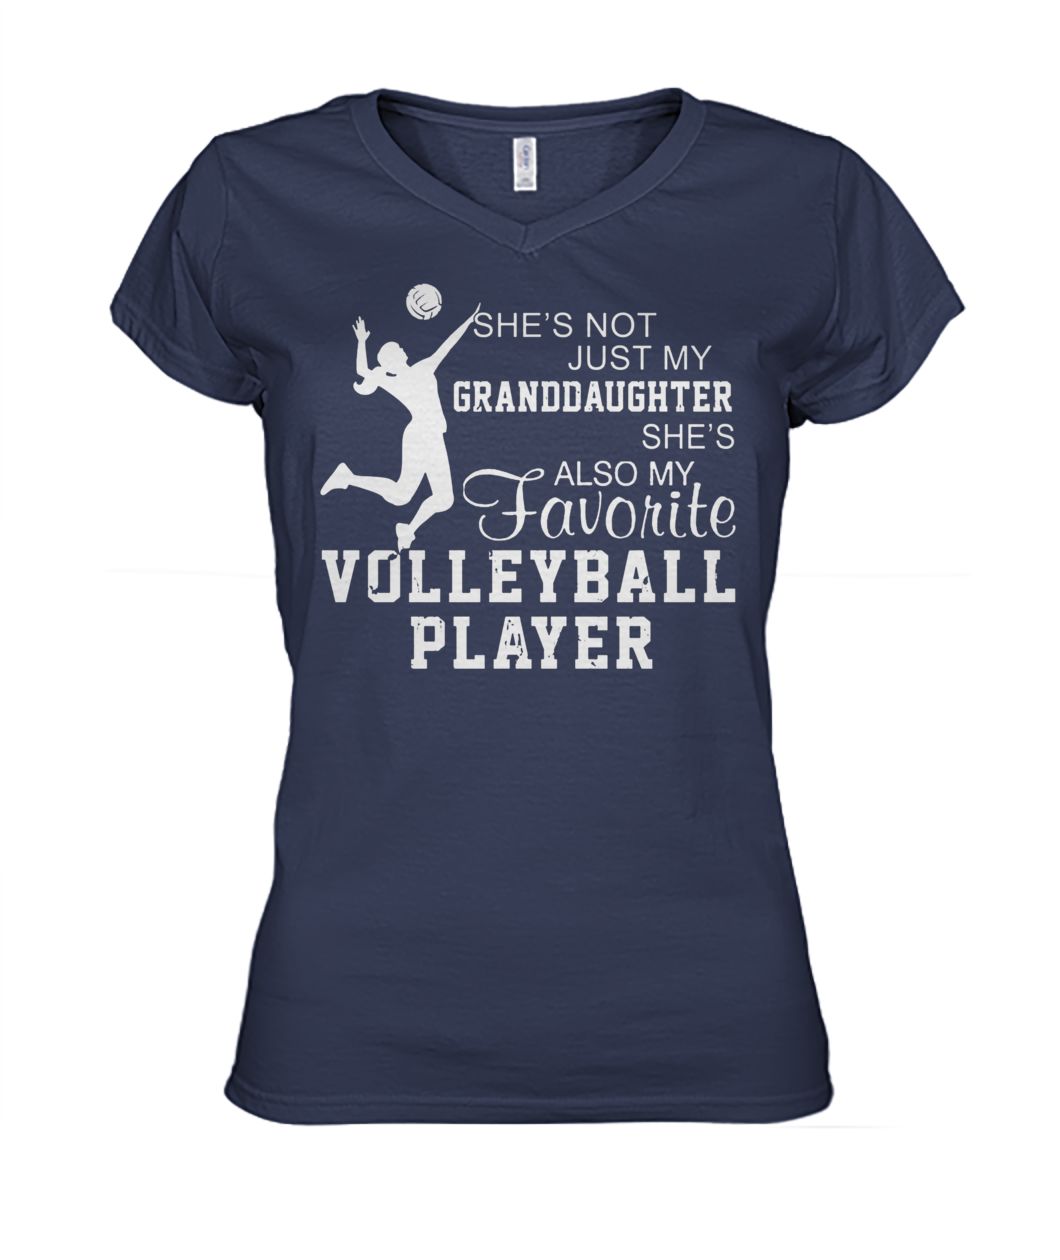 She's not just my granddaughter she's also my favorite volleyball player women's v-neck